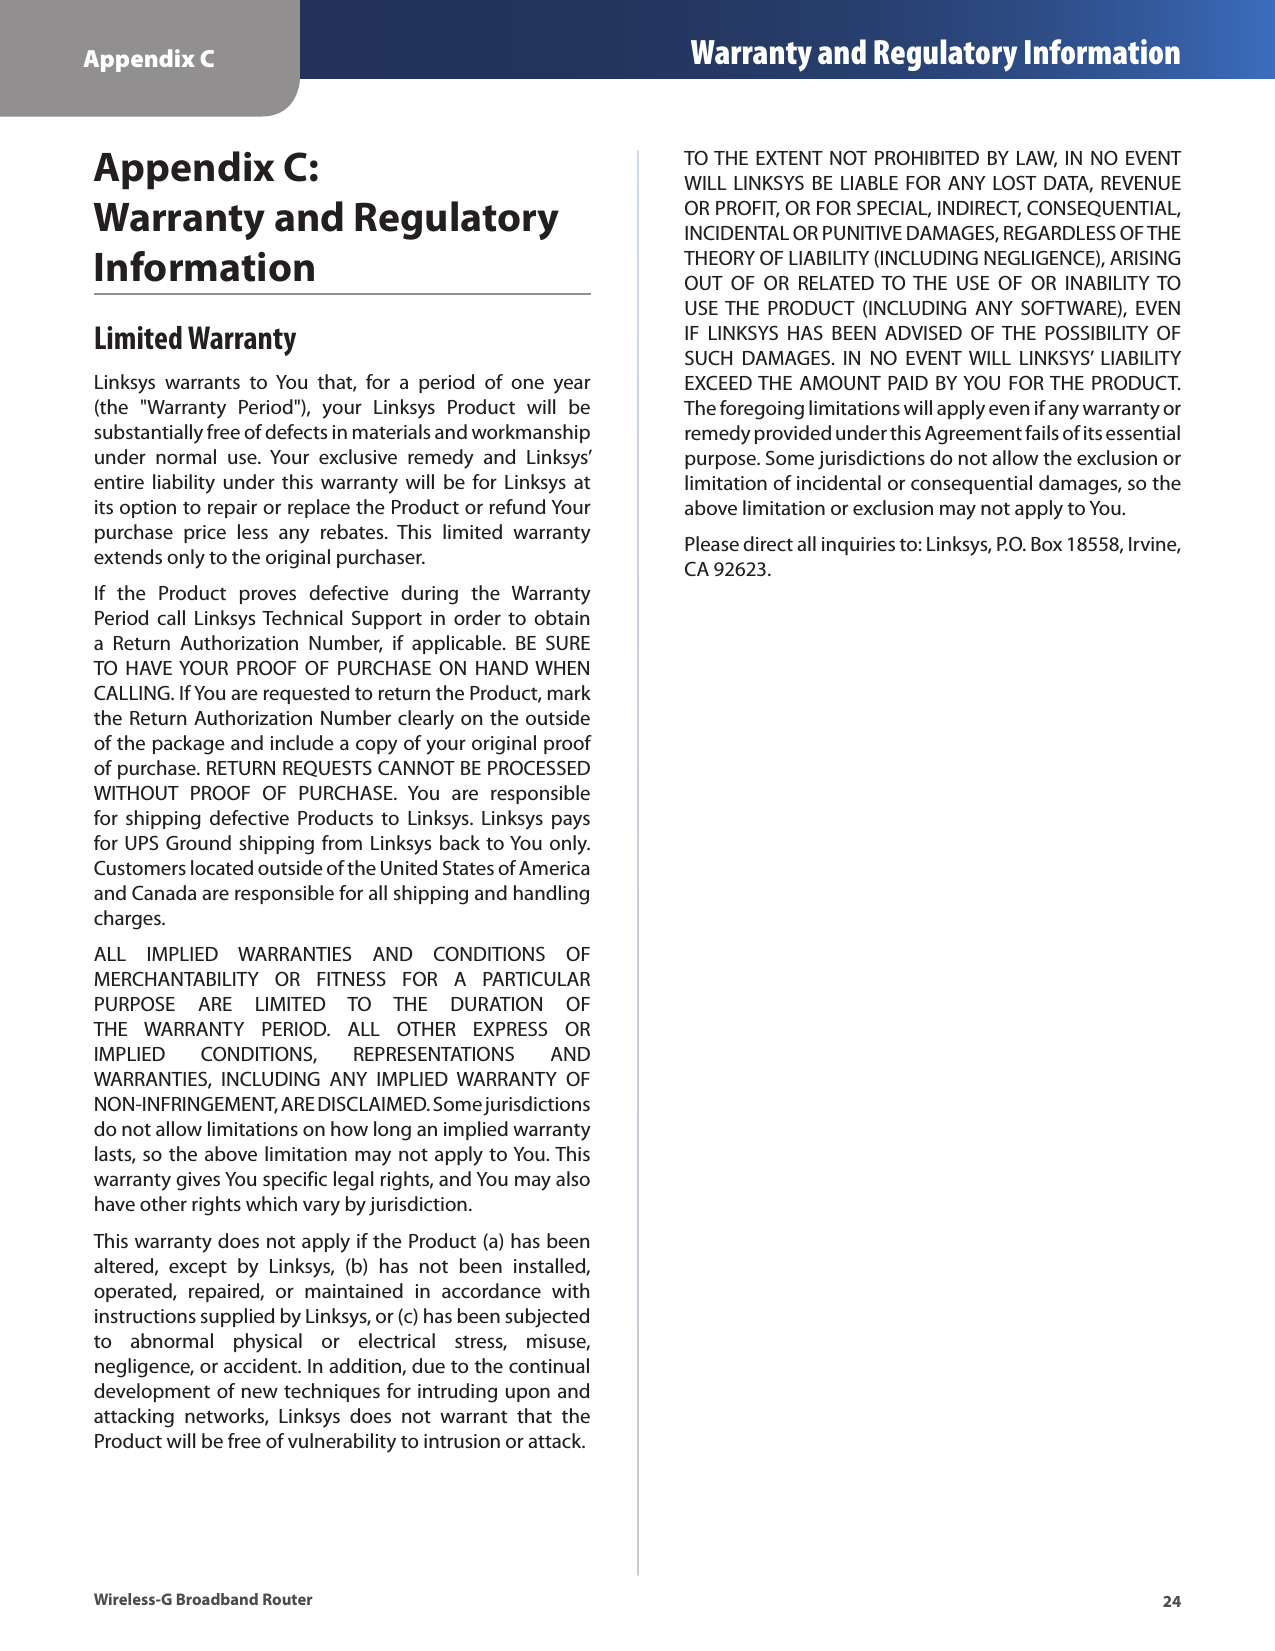 Appendix C Warranty and Regulatory Information24Wireless-G Broadband RouterAppendix C:  Warranty and Regulatory InformationLimited WarrantyLinksys  warrants  to  You  that,  for  a  period  of  one  year (the  &quot;Warranty  Period&quot;),  your  Linksys  Product  will  be substantially free of defects in materials and workmanship under  normal  use.  Your  exclusive  remedy  and  Linksys’ entire liability  under  this  warranty  will  be for Linksys  at its option to repair or replace the Product or refund Your purchase  price  less  any  rebates.  This  limited  warranty extends only to the original purchaser. If  the  Product  proves  defective  during  the  Warranty Period call  Linksys Technical  Support  in  order  to  obtain a  Return  Authorization  Number,  if  applicable.  BE  SURE TO  HAVE YOUR PROOF  OF  PURCHASE  ON  HAND WHEN CALLING. If You are requested to return the Product, mark the Return Authorization Number clearly on the outside of the package and include a copy of your original proof of purchase. RETURN REQUESTS CANNOT BE PROCESSED WITHOUT  PROOF  OF  PURCHASE.  You  are  responsible for  shipping  defective  Products  to  Linksys.  Linksys  pays for UPS Ground shipping from Linksys back to You only. Customers located outside of the United States of America and Canada are responsible for all shipping and handling charges. ALL  IMPLIED  WARRANTIES  AND  CONDITIONS  OF MERCHANTABILITY  OR  FITNESS  FOR  A  PARTICULAR PURPOSE  ARE  LIMITED  TO  THE  DURATION  OF THE  WARRANTY  PERIOD.  ALL  OTHER  EXPRESS  OR IMPLIED  CONDITIONS,  REPRESENTATIONS  AND WARRANTIES,  INCLUDING  ANY  IMPLIED  WARRANTY  OF NON-INFRINGEMENT, ARE DISCLAIMED. Some jurisdictions do not allow limitations on how long an implied warranty lasts, so the above limitation may not apply to You. This warranty gives You specific legal rights, and You may also have other rights which vary by jurisdiction.This warranty does not apply if the Product (a) has been altered,  except  by  Linksys,  (b)  has  not  been  installed, operated,  repaired,  or  maintained  in  accordance  with instructions supplied by Linksys, or (c) has been subjected to  abnormal  physical  or  electrical  stress,  misuse, negligence, or accident. In addition, due to the continual development of new techniques for intruding upon and attacking  networks,  Linksys  does  not  warrant  that  the Product will be free of vulnerability to intrusion or attack.TO THE EXTENT NOT PROHIBITED BY  LAW, IN NO EVENT WILL LINKSYS  BE LIABLE FOR ANY LOST DATA, REVENUE OR PROFIT, OR FOR SPECIAL, INDIRECT, CONSEQUENTIAL, INCIDENTAL OR PUNITIVE DAMAGES, REGARDLESS OF THE THEORY OF LIABILITY (INCLUDING NEGLIGENCE), ARISING OUT  OF  OR  RELATED  TO  THE  USE  OF  OR  INABILITY  TO USE THE  PRODUCT  (INCLUDING  ANY  SOFTWARE),  EVEN IF  LINKSYS  HAS  BEEN  ADVISED  OF THE  POSSIBILITY  OF SUCH  DAMAGES.  IN  NO  EVENT  WILL  LINKSYS’  LIABILITY EXCEED THE AMOUNT PAID BY YOU FOR THE PRODUCT. The foregoing limitations will apply even if any warranty or remedy provided under this Agreement fails of its essential purpose. Some jurisdictions do not allow the exclusion or limitation of incidental or consequential damages, so the above limitation or exclusion may not apply to You.Please direct all inquiries to: Linksys, P.O. Box 18558, Irvine, CA 92623.